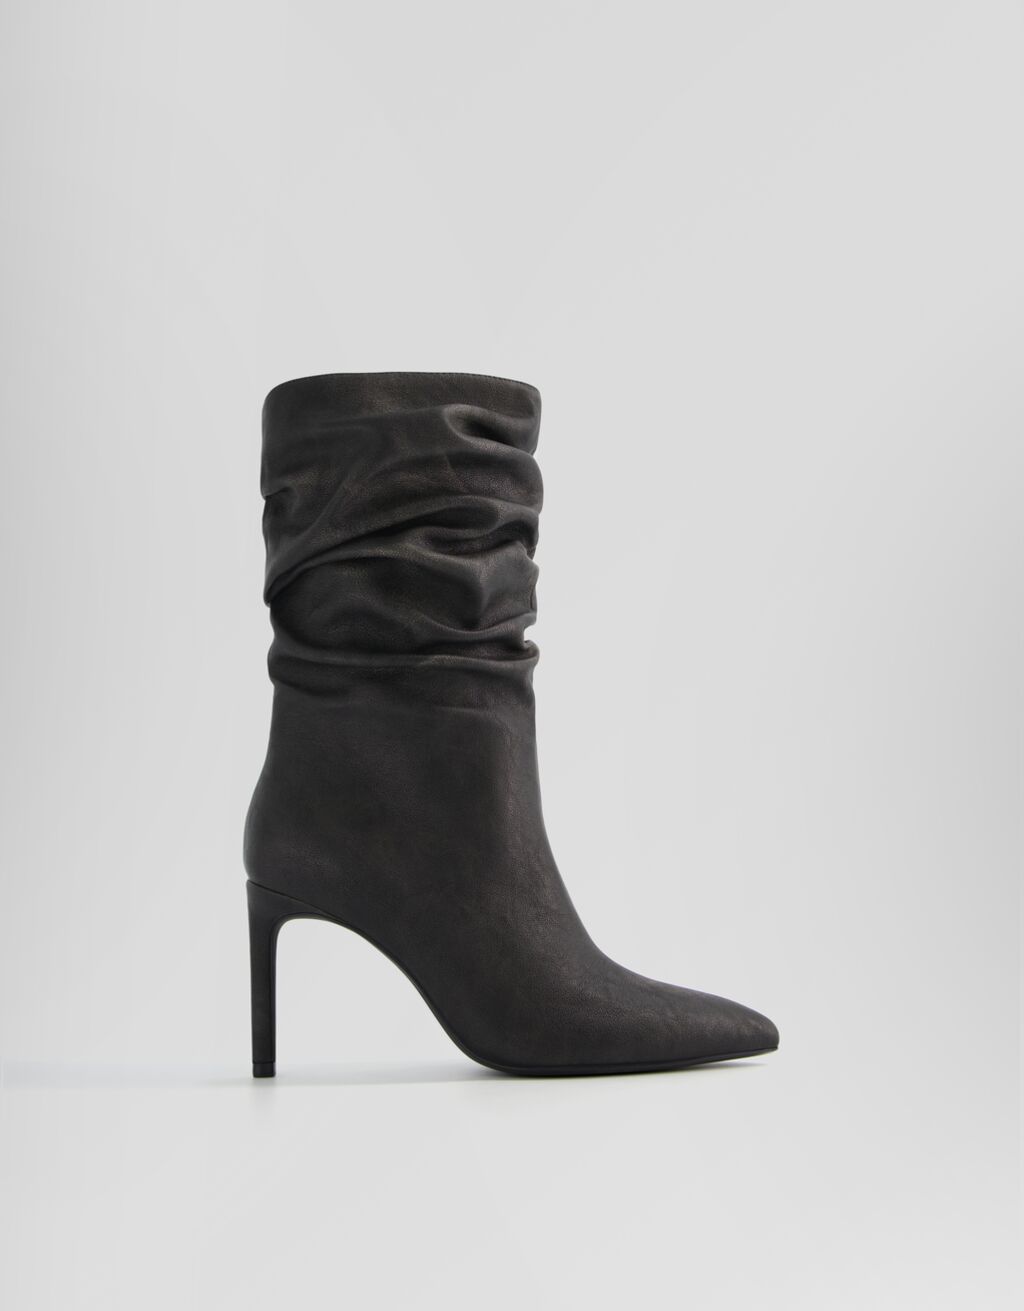 Slouchy stiletto heel ankle boots